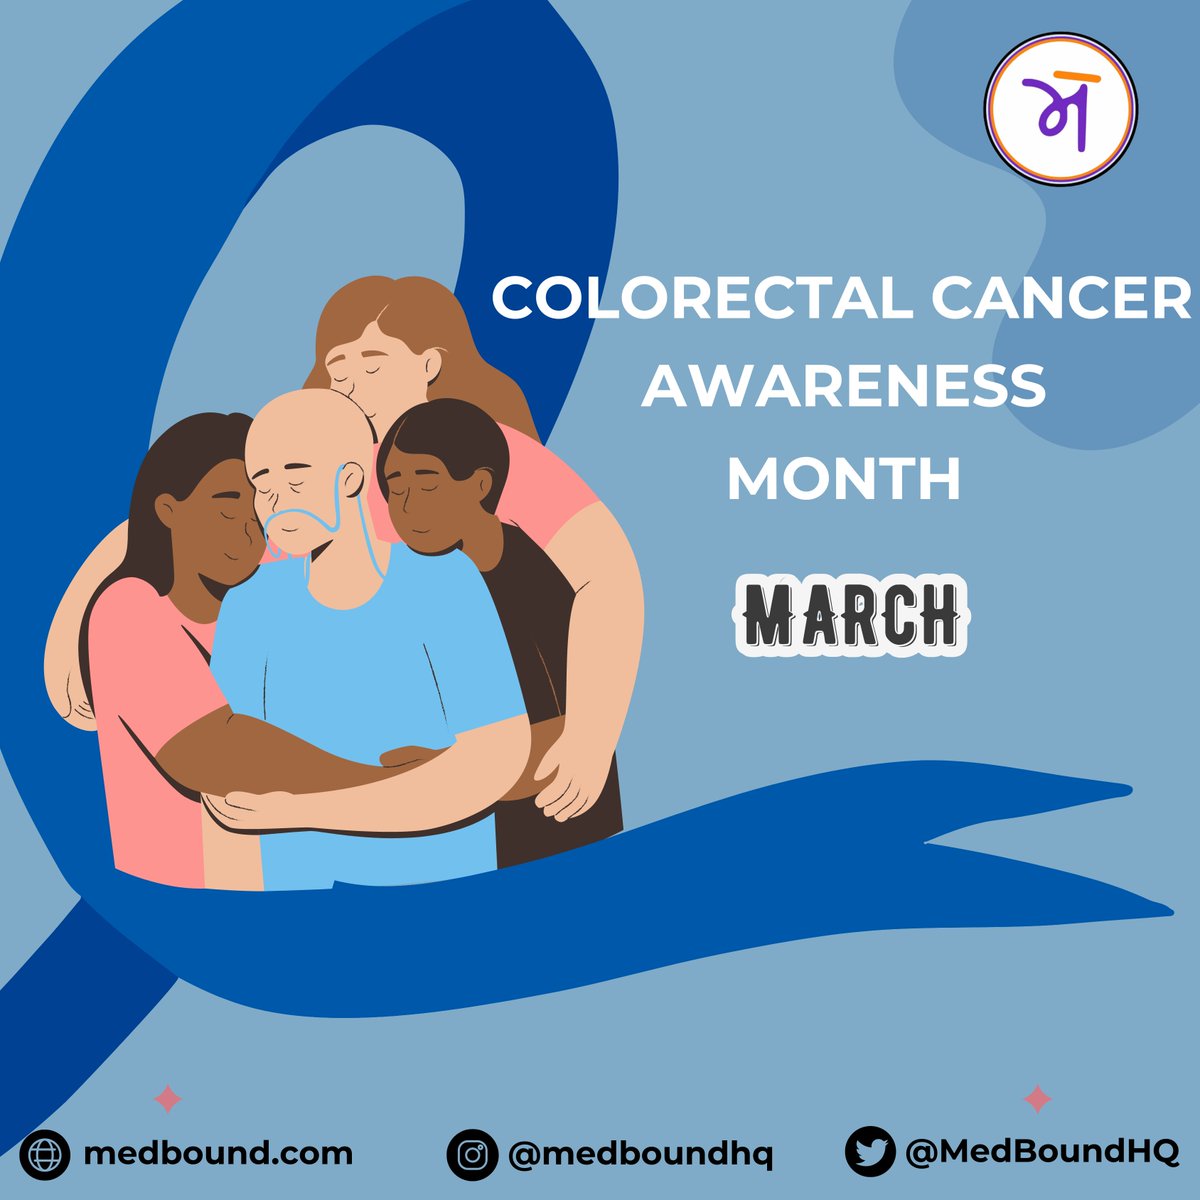 Colorectal health: Let's talk, let's screen, let's save lives! #ColorectalCancerAwarenessMonth

Colorectal Cancer Awareness Month is observed annually in March. Colorectal cancer ranks second globally in terms of cancer-related fatalities and is the third most frequent type of